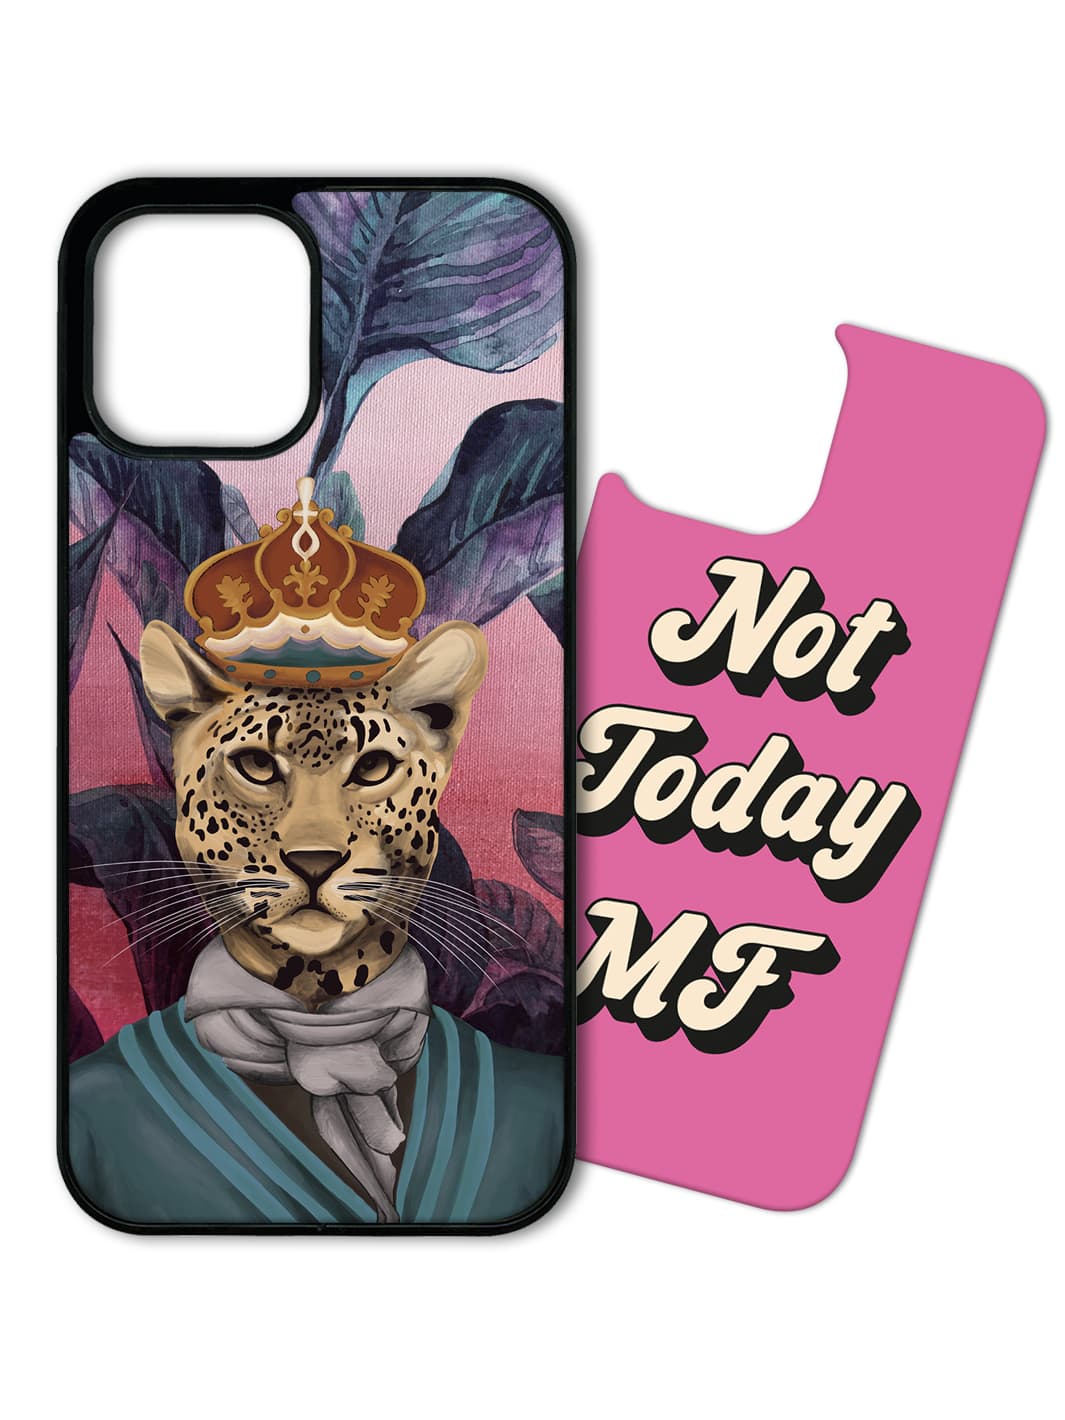 Phone Case Set - Not Today MF